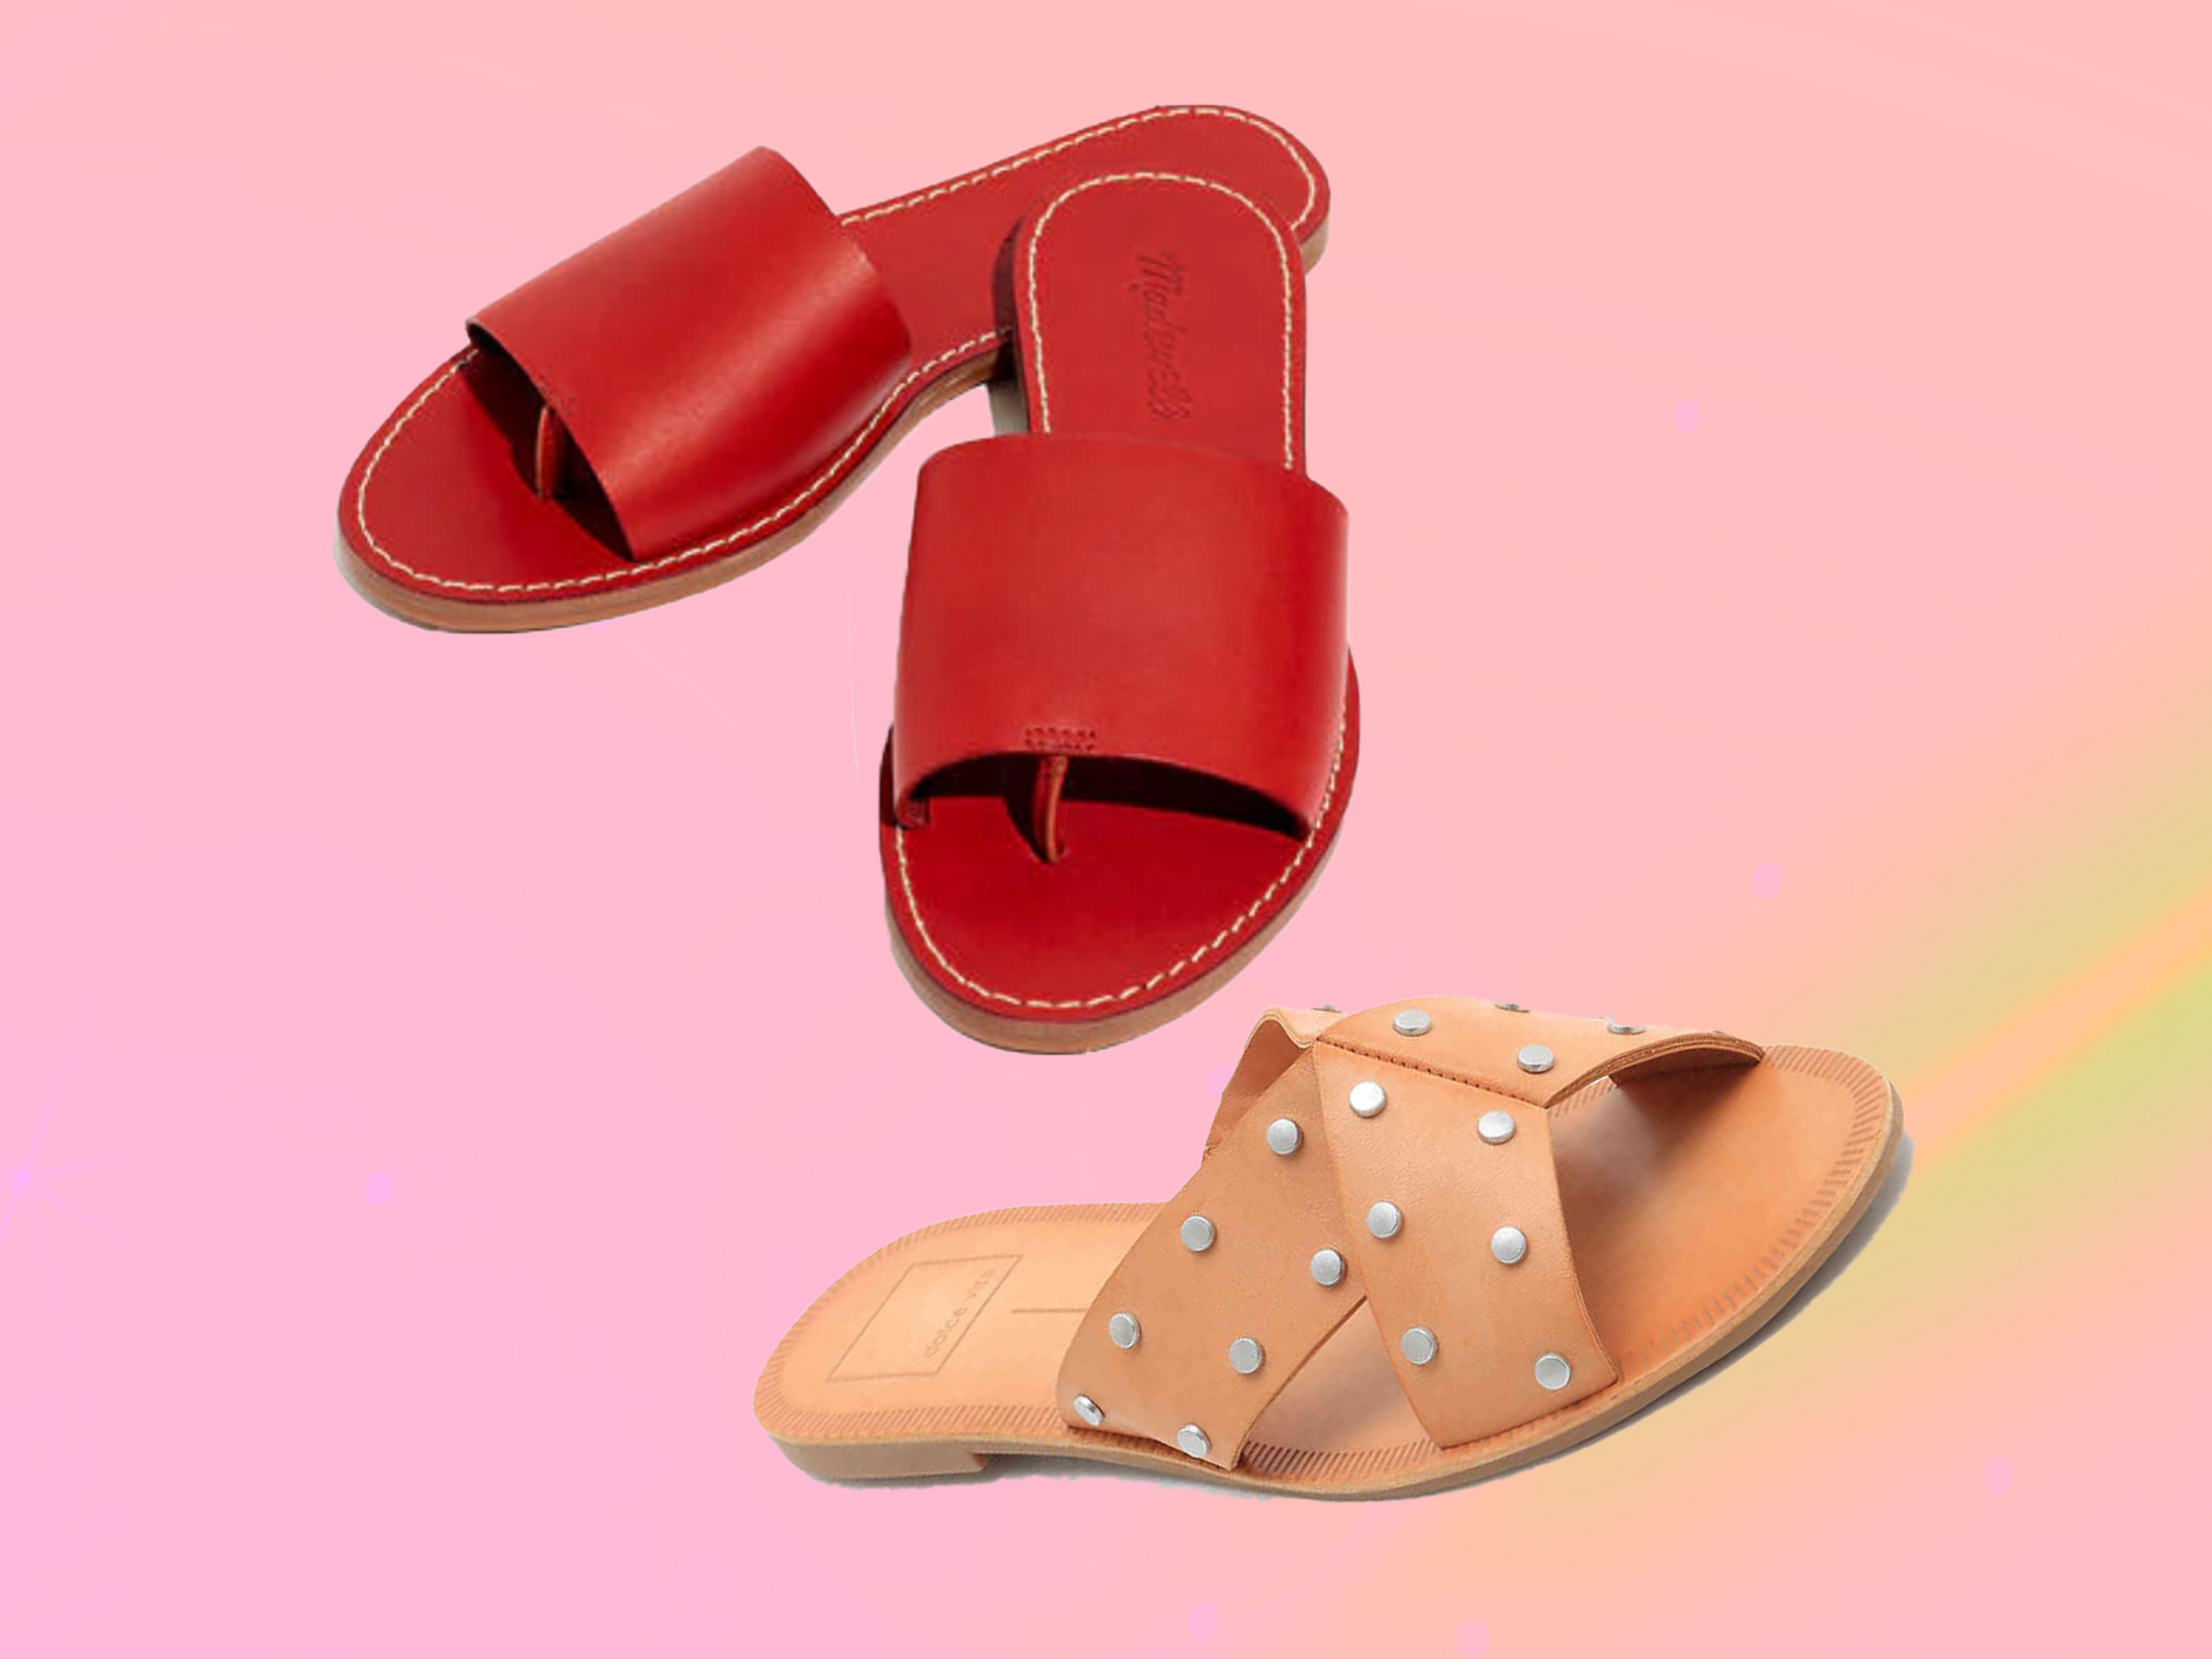 These Chic Flat Sandals Under $100 Are All You Need For Summer